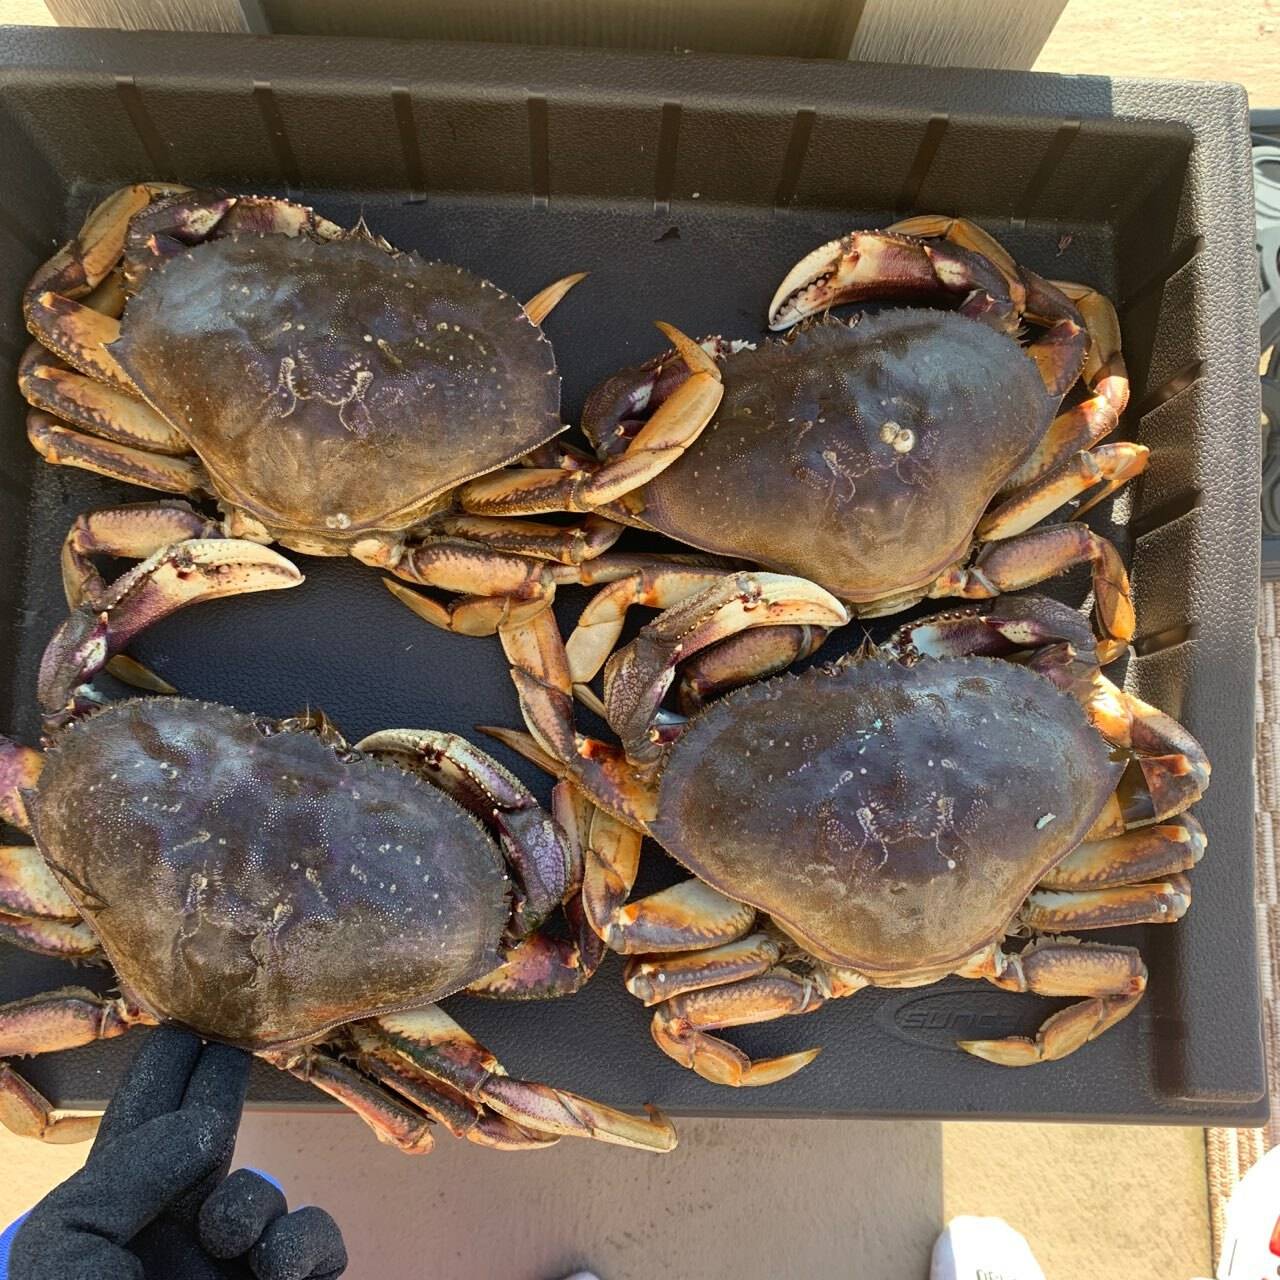 Photo by Aiden Santos
Dungeness crab are the most popular among Whidbey crabbers.